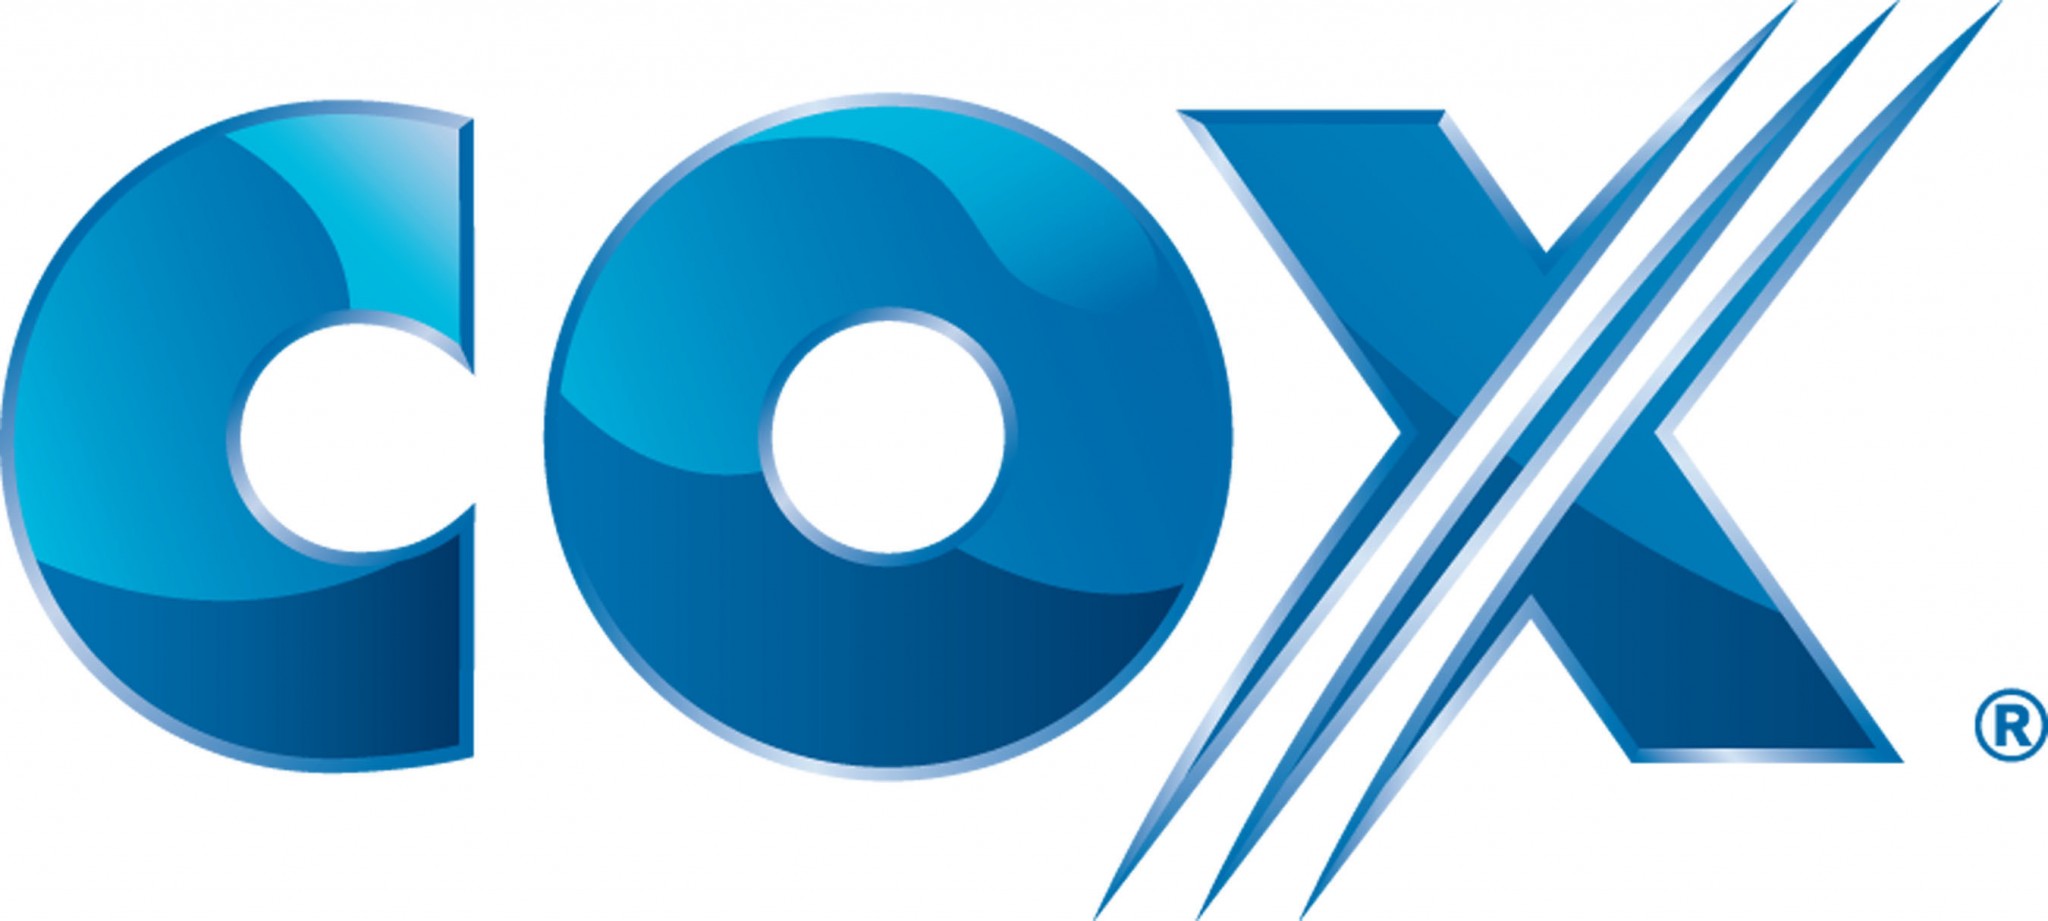 Cox and Nexstar Sign Multi-Year Distribution Deal For Local ABC, CBS, FOX, NBC Stations, Heading Off Any Blackouts